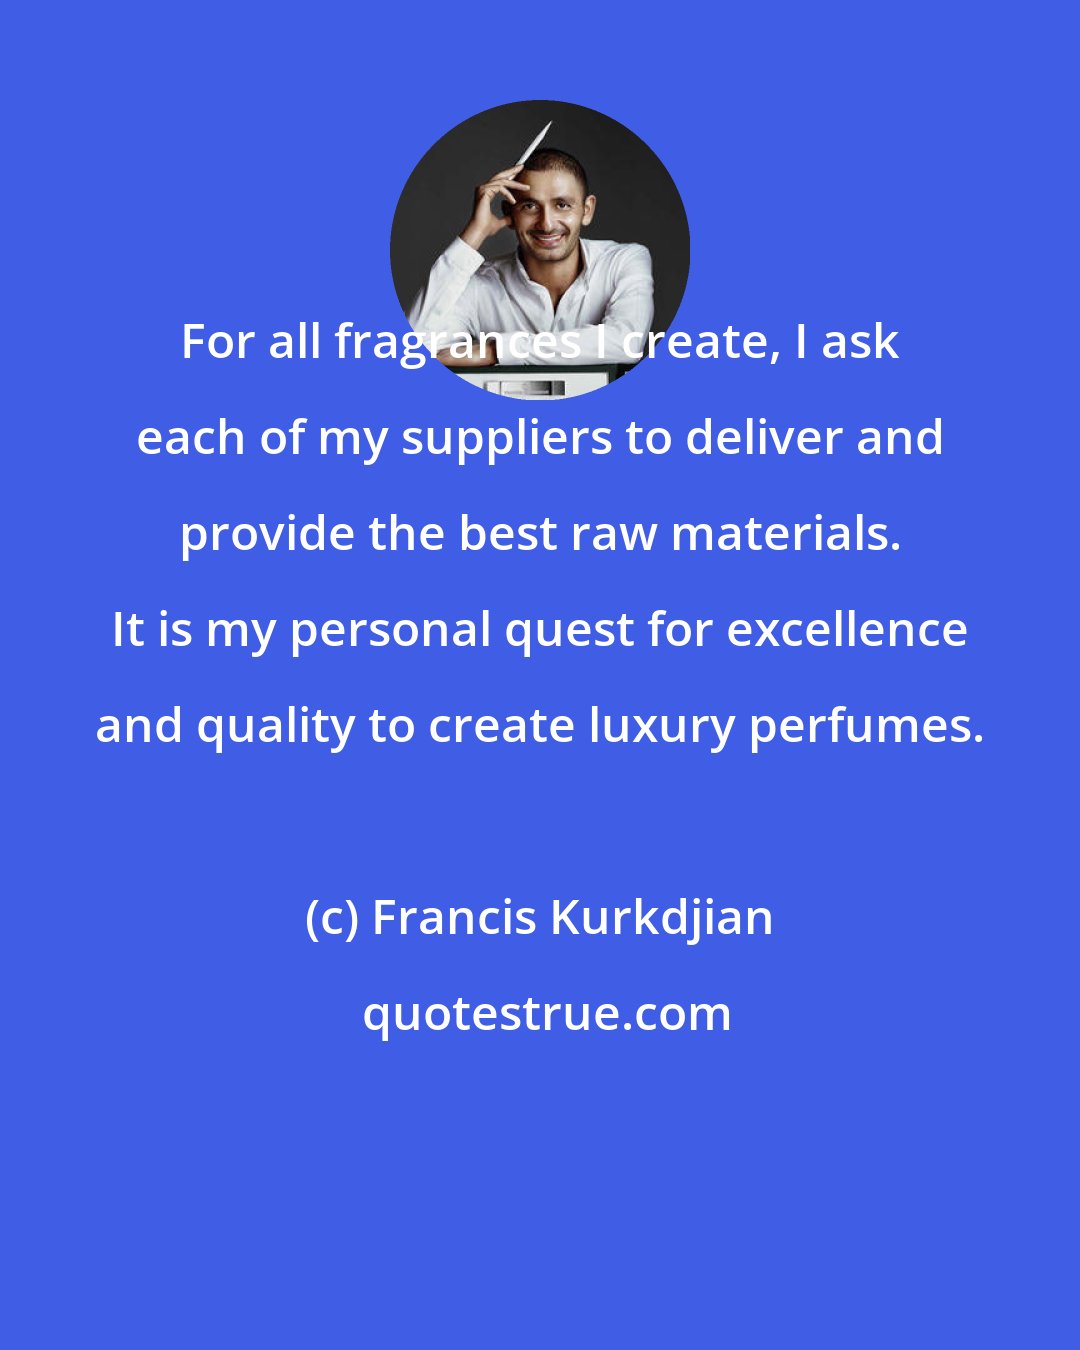 Francis Kurkdjian: For all fragrances I create, I ask each of my suppliers to deliver and provide the best raw materials. It is my personal quest for excellence and quality to create luxury perfumes.